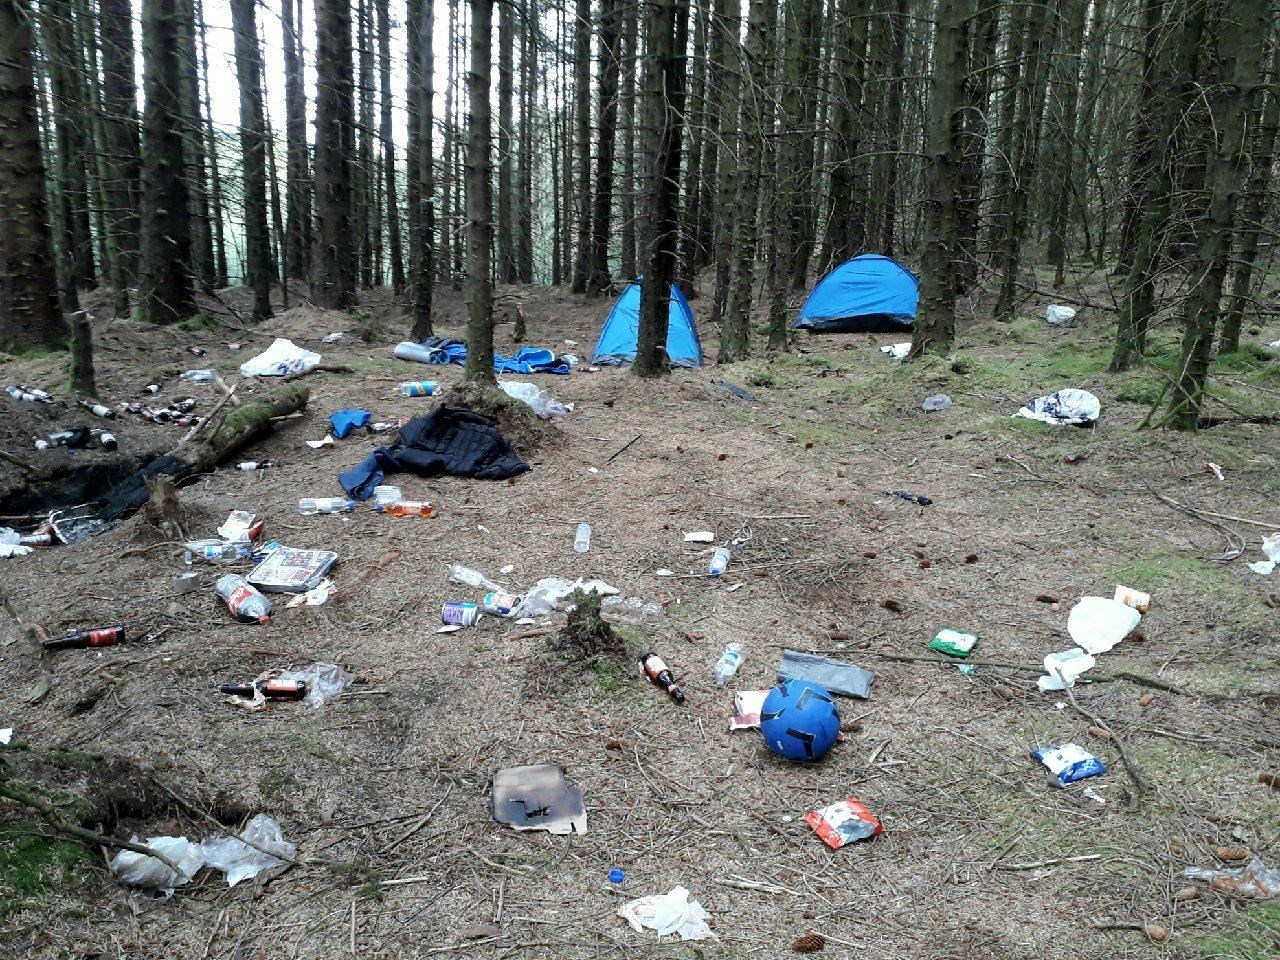 Littering at one of Forestry and Land Scotland's sites in the Loch Lomond area.